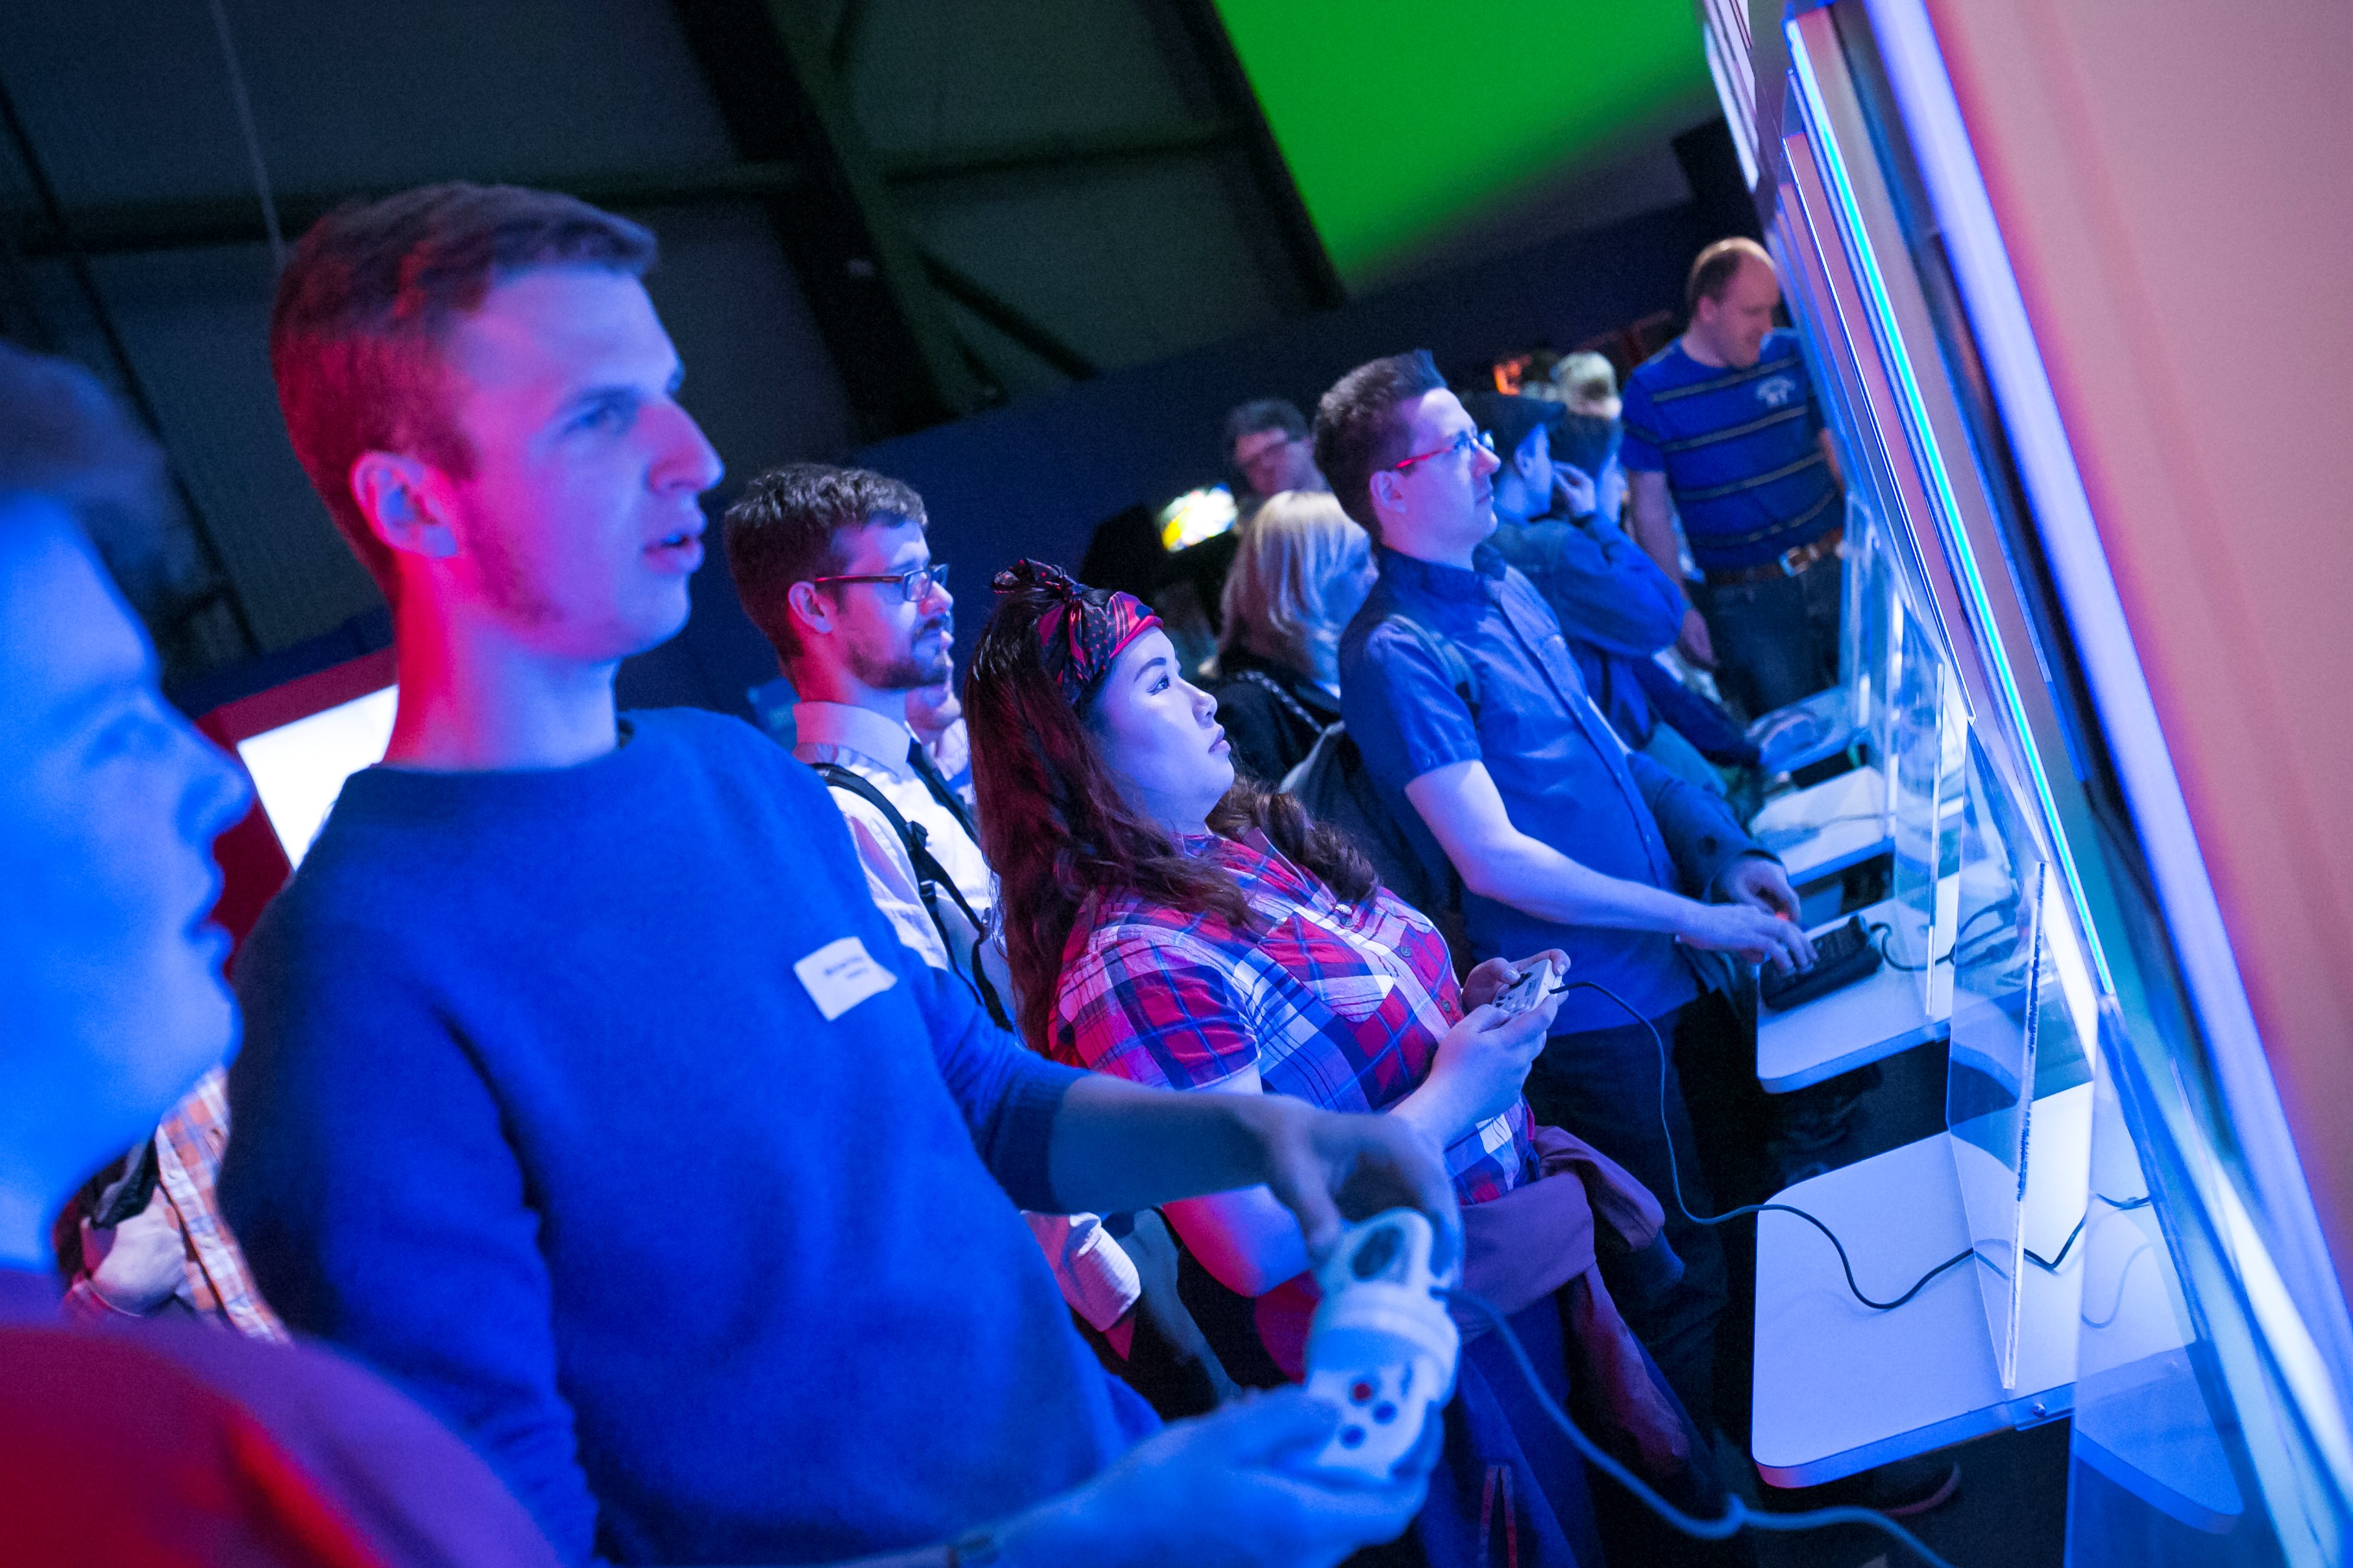 Nine players line up to play across a number of static consoles in a Game On exhibition space at Life in Newcastle.